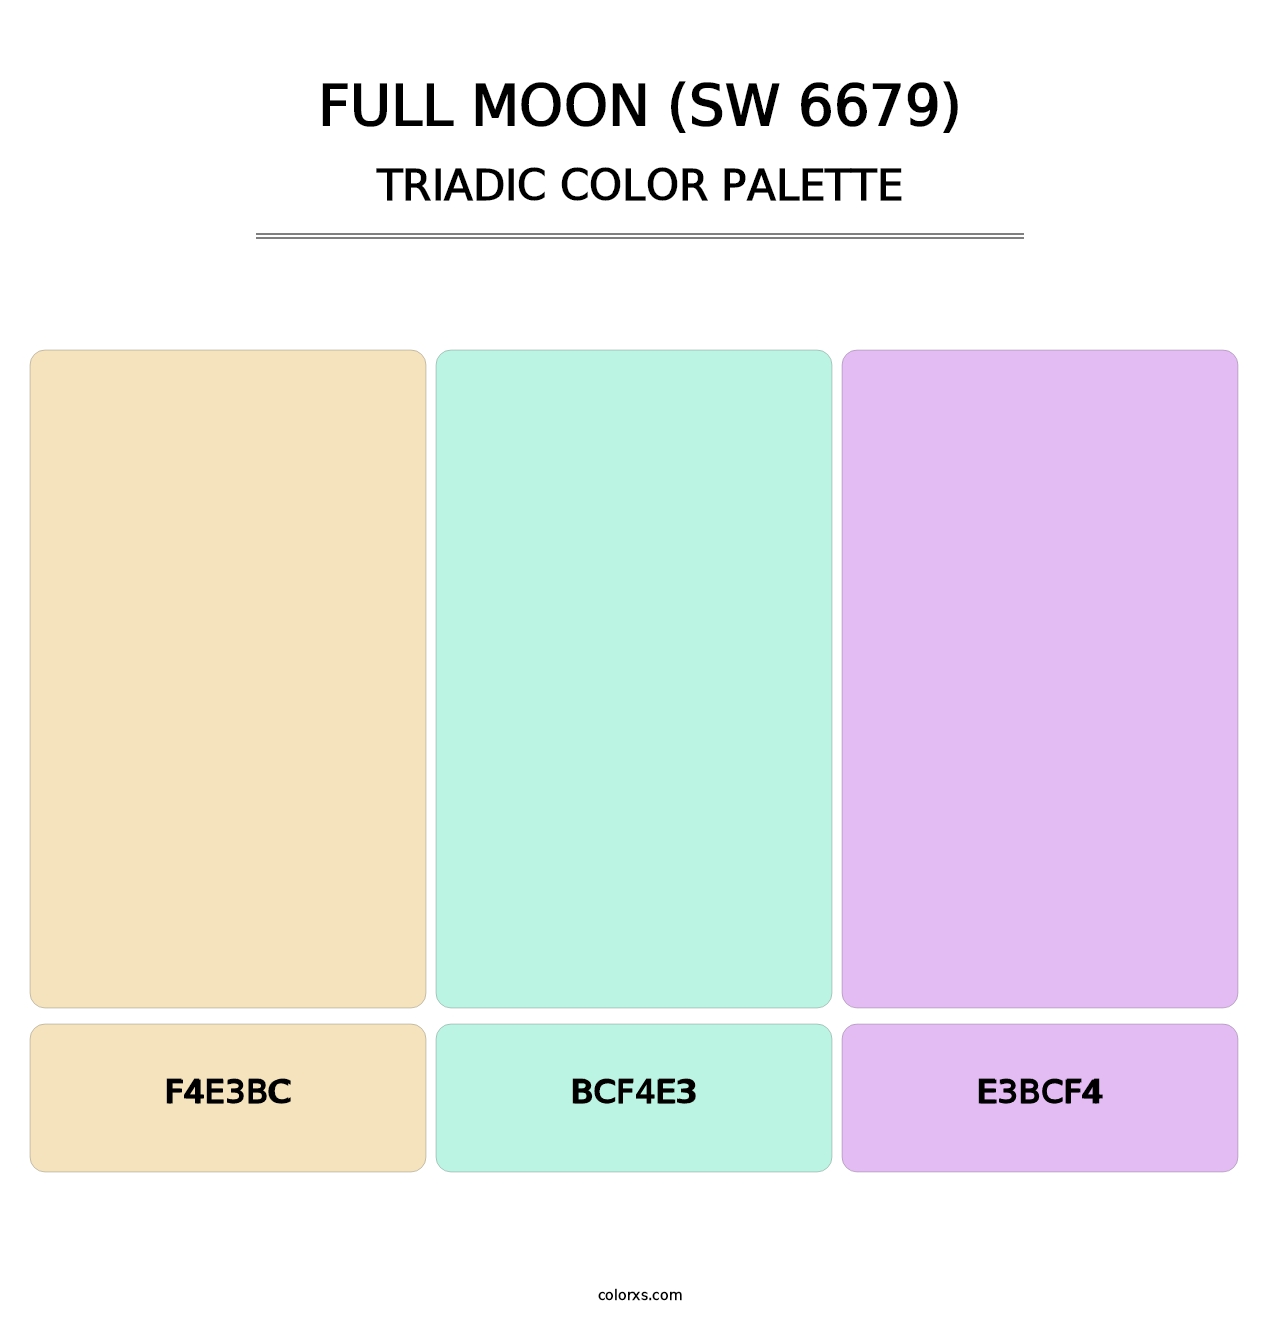 Full Moon (SW 6679) - Triadic Color Palette